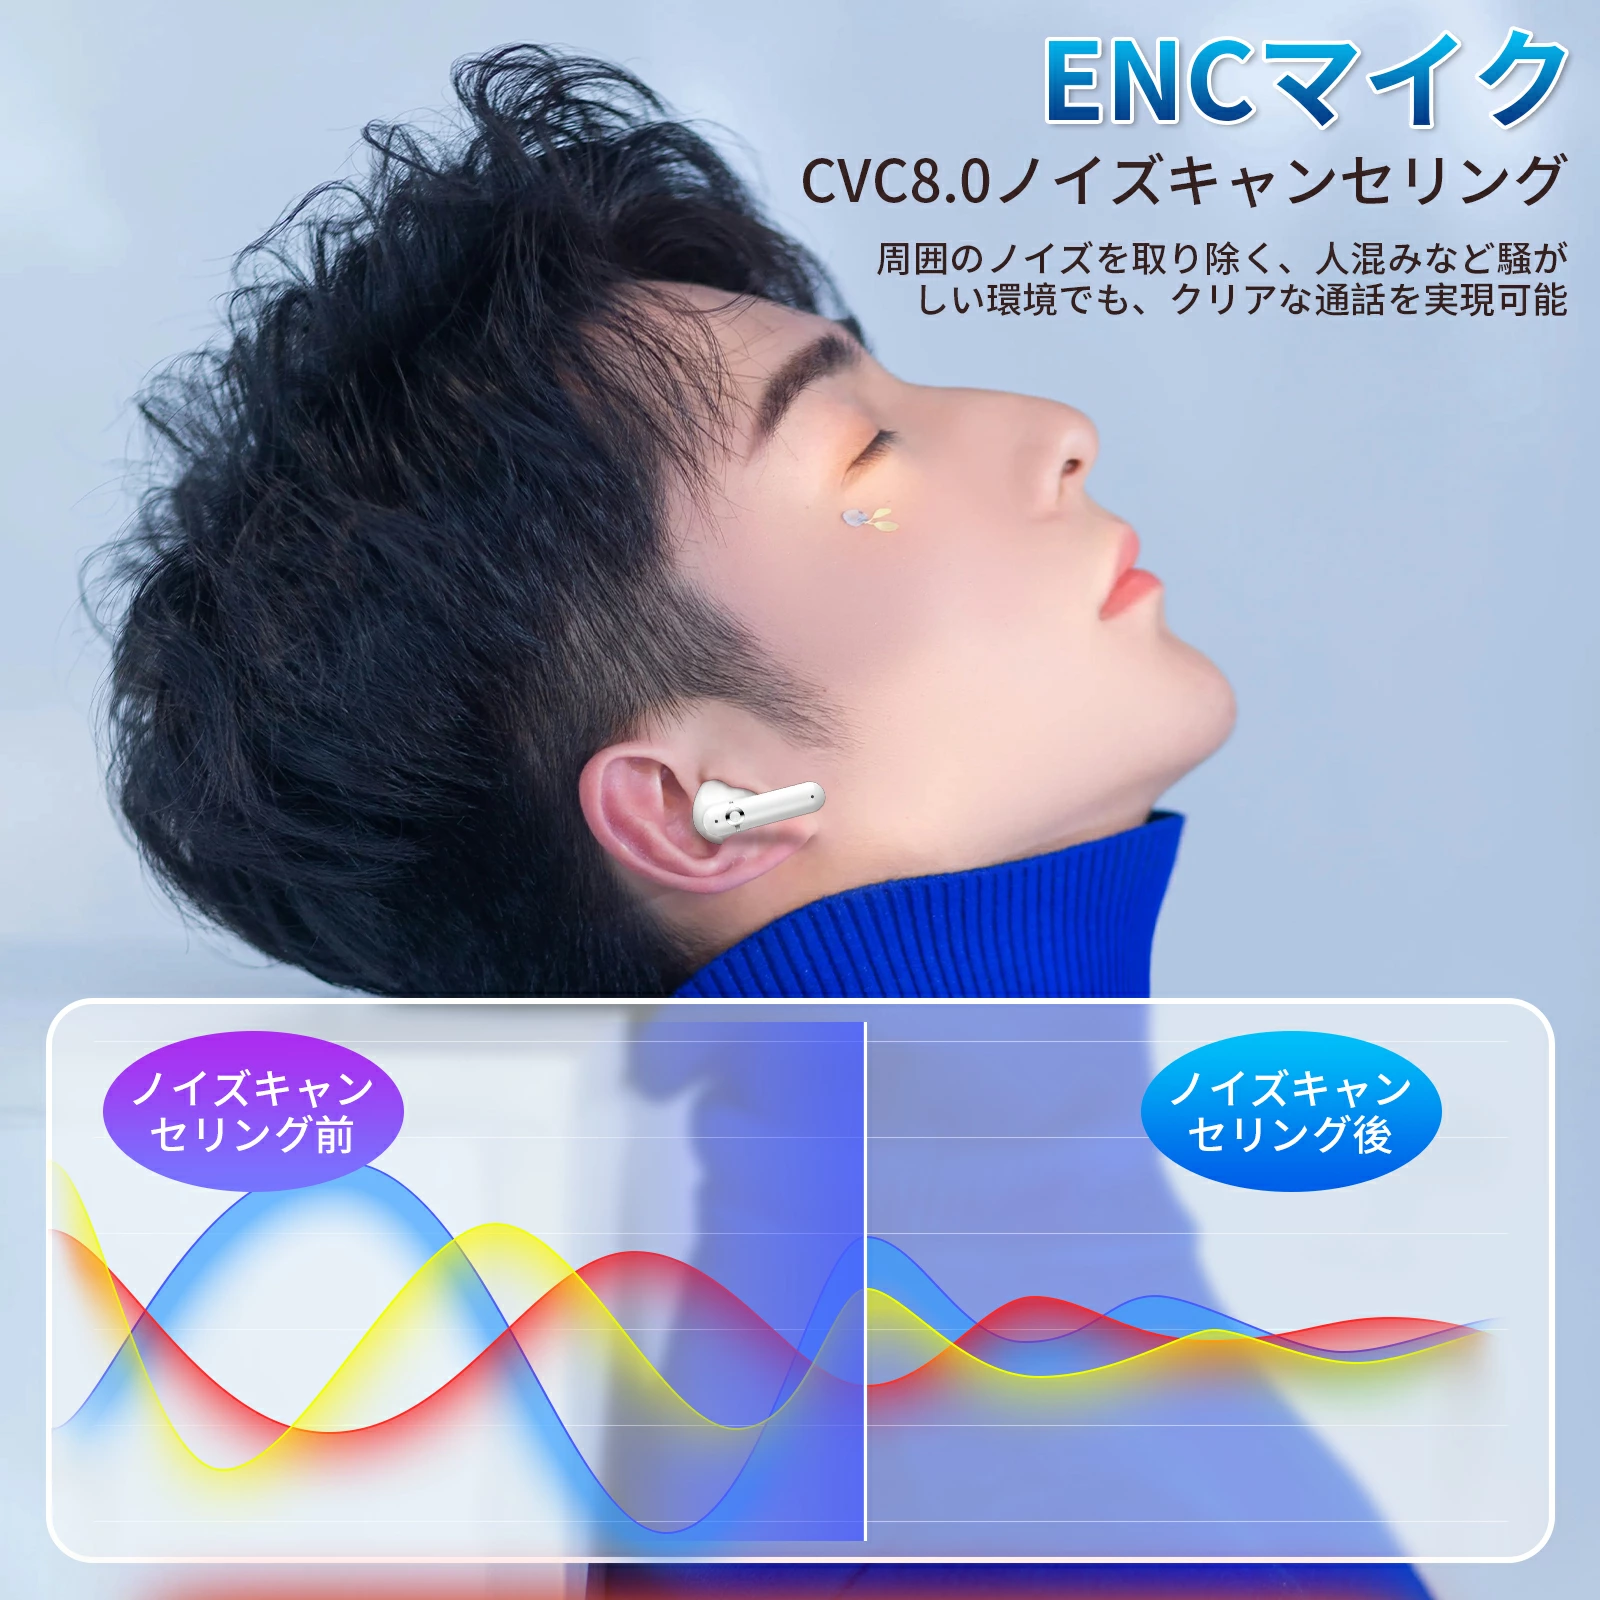  wireless earphone earphone height sound quality HiFi Bluetooth5.3 noise cancel ring one-side ear mode Mike ipx6 waterproof automatic pair iPhone Android correspondence present Mother's Day 